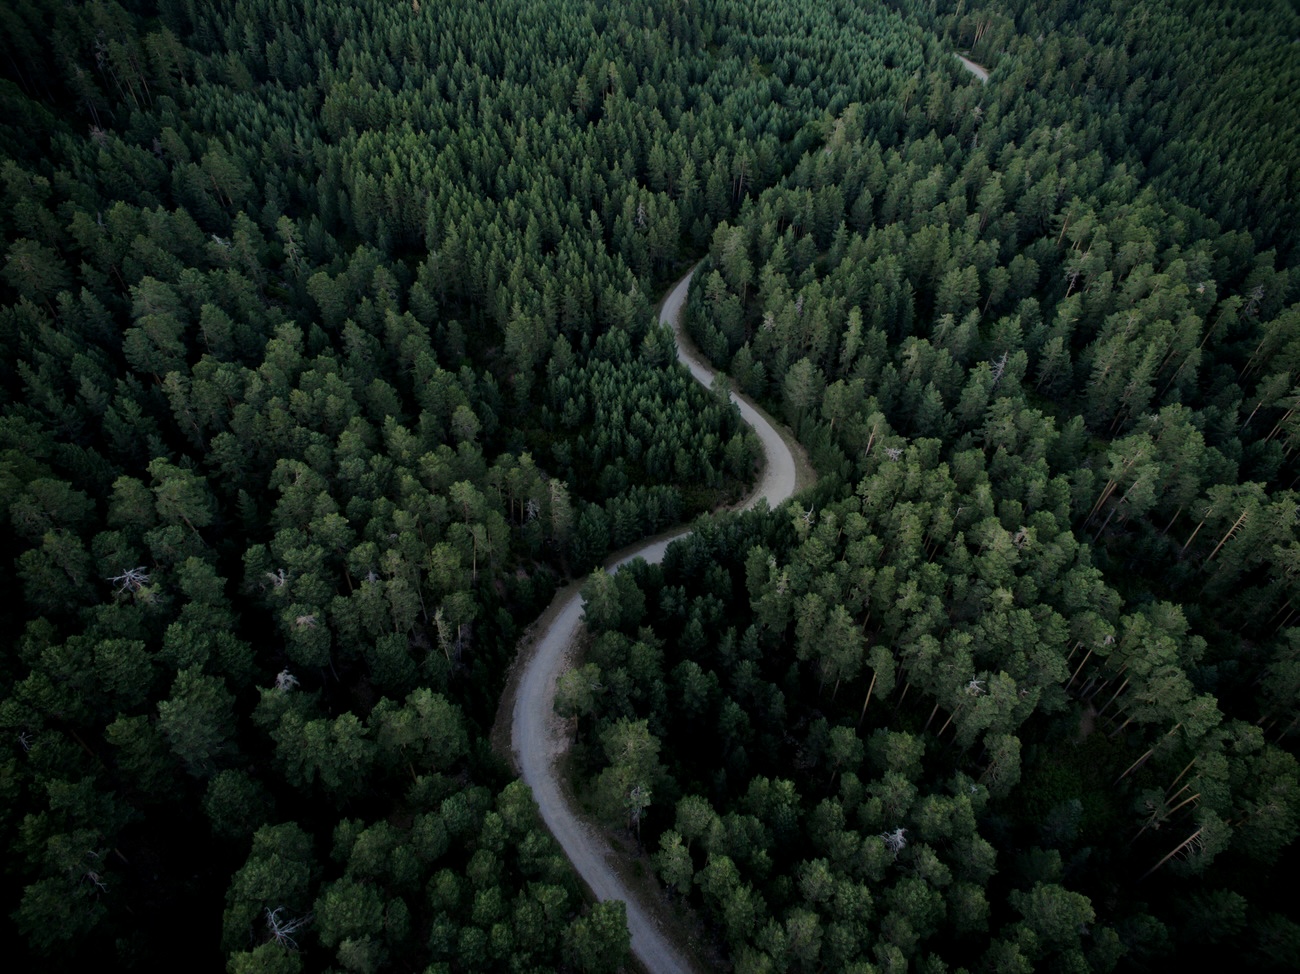 Image of a forest with a winding road